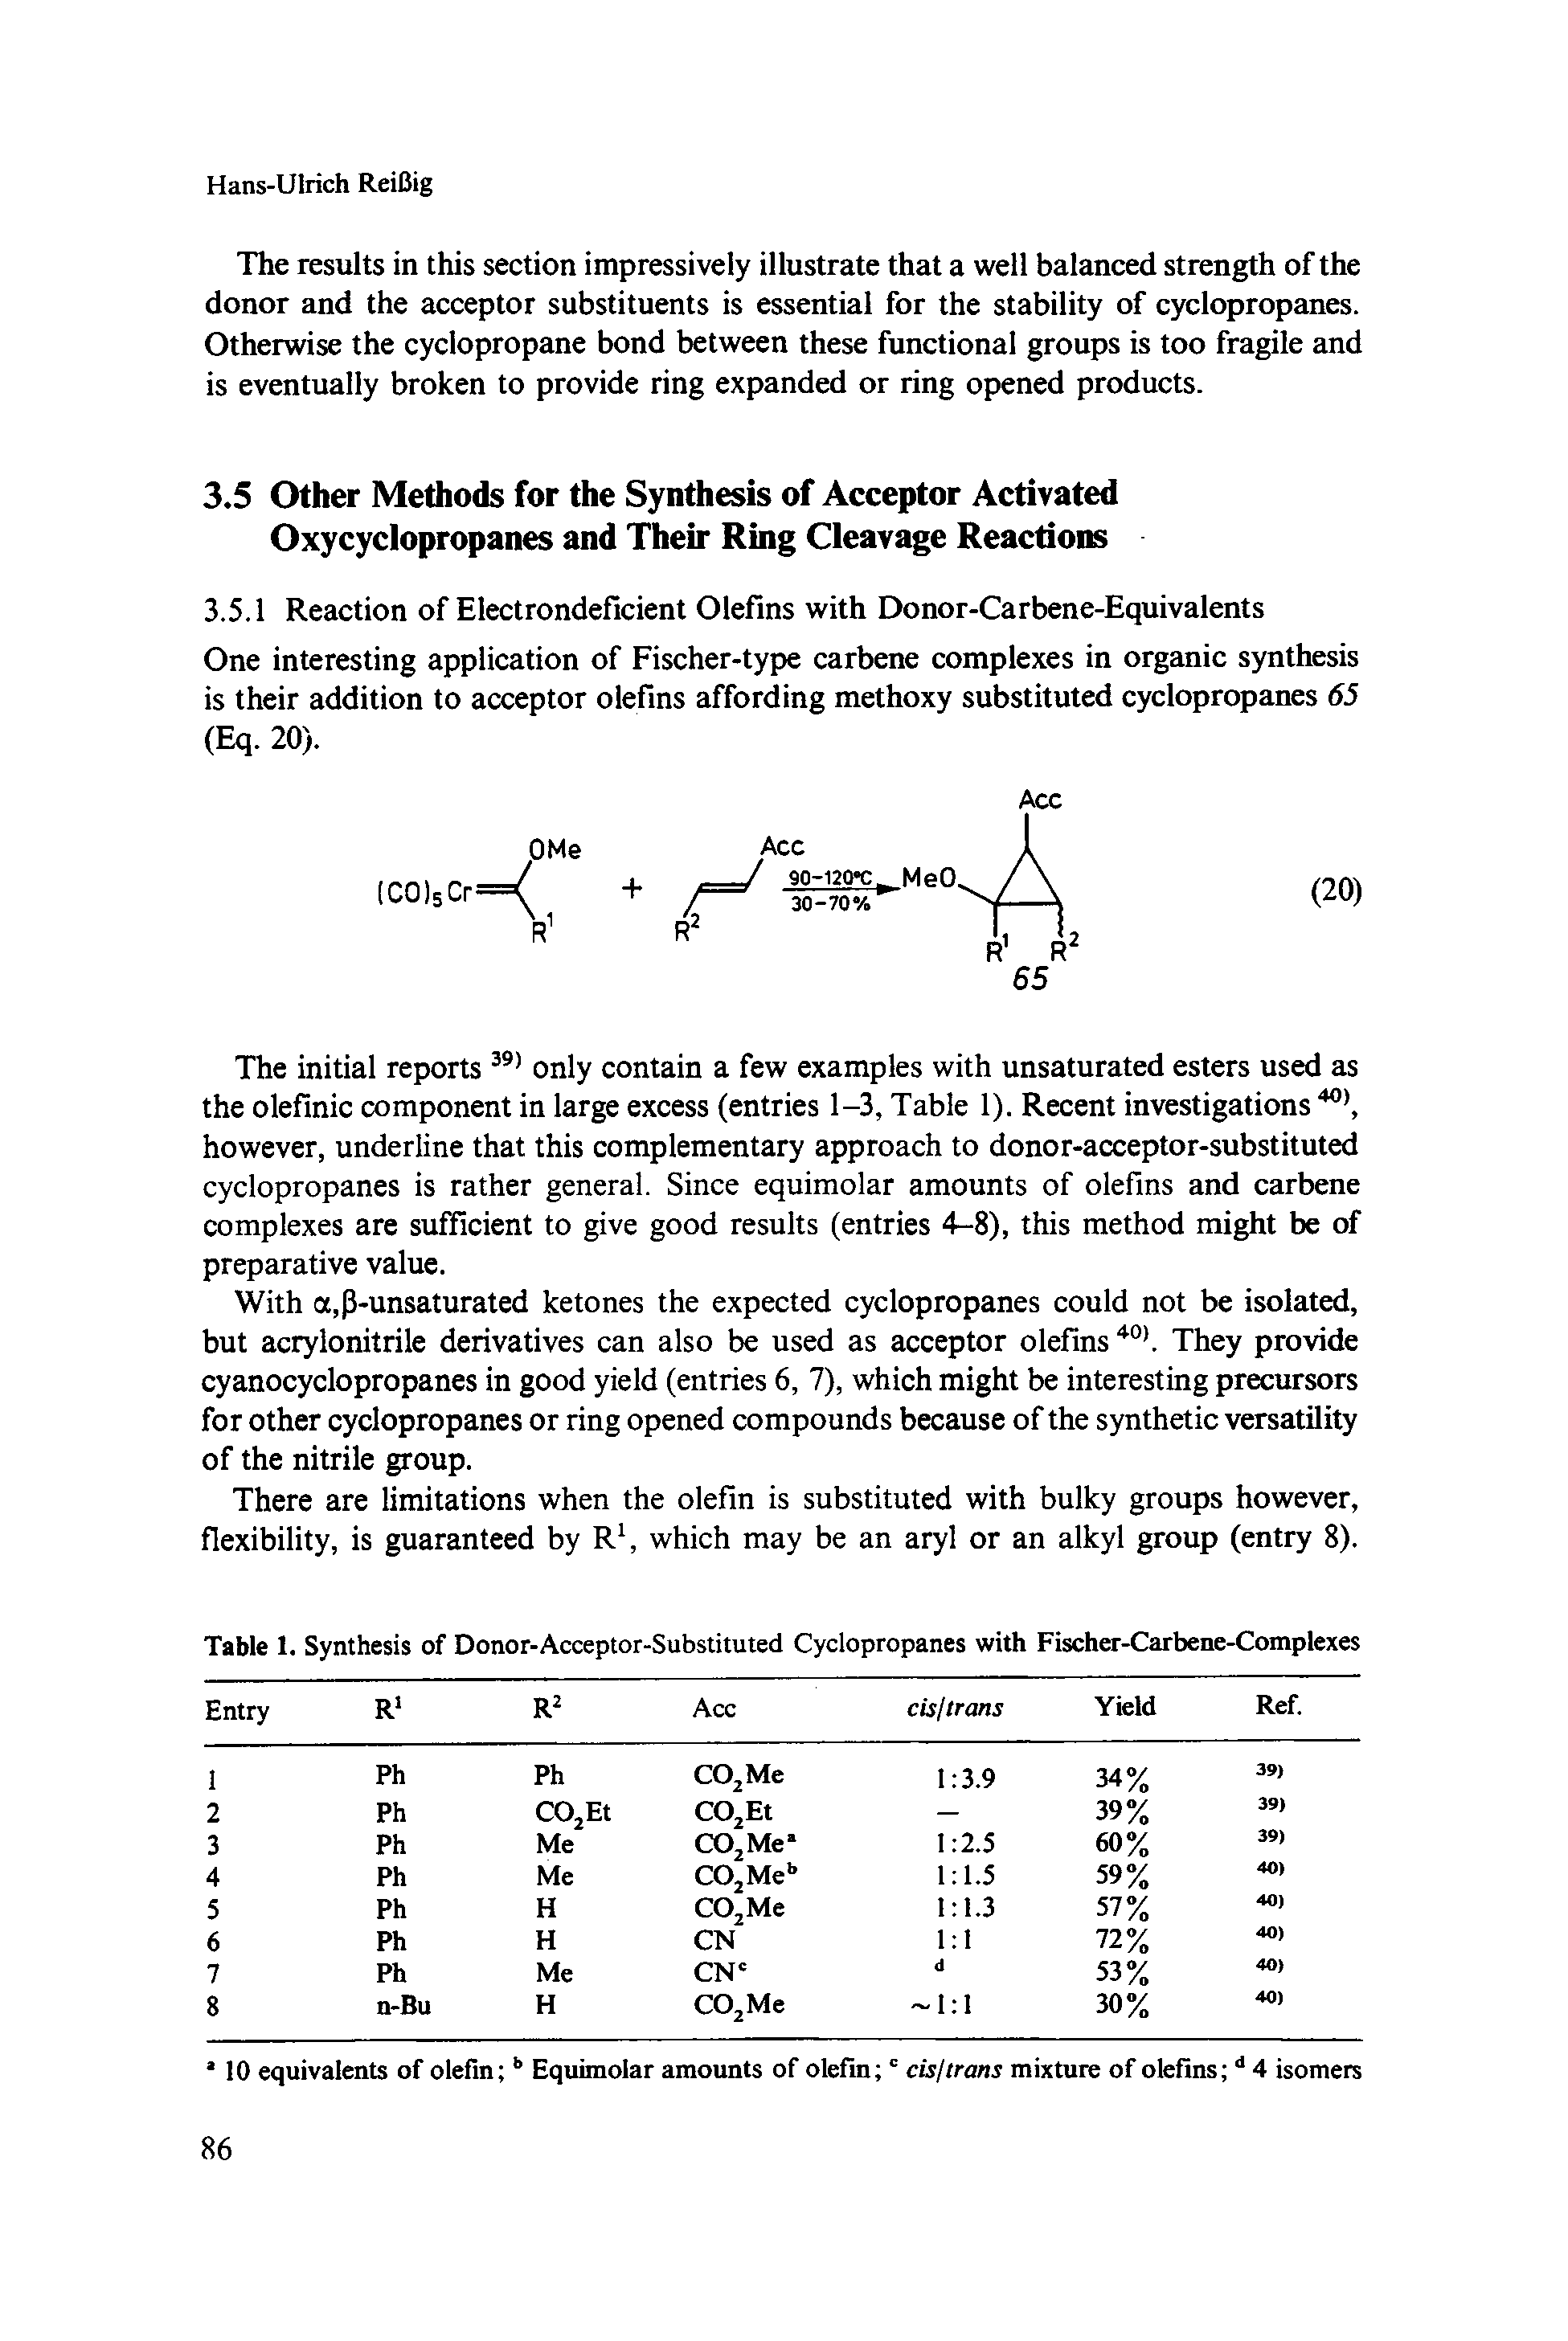 Table 1. Synthesis of Donor-Acceptor-Substituted Cyclopropanes with Fischer-Carbene-Complexes...